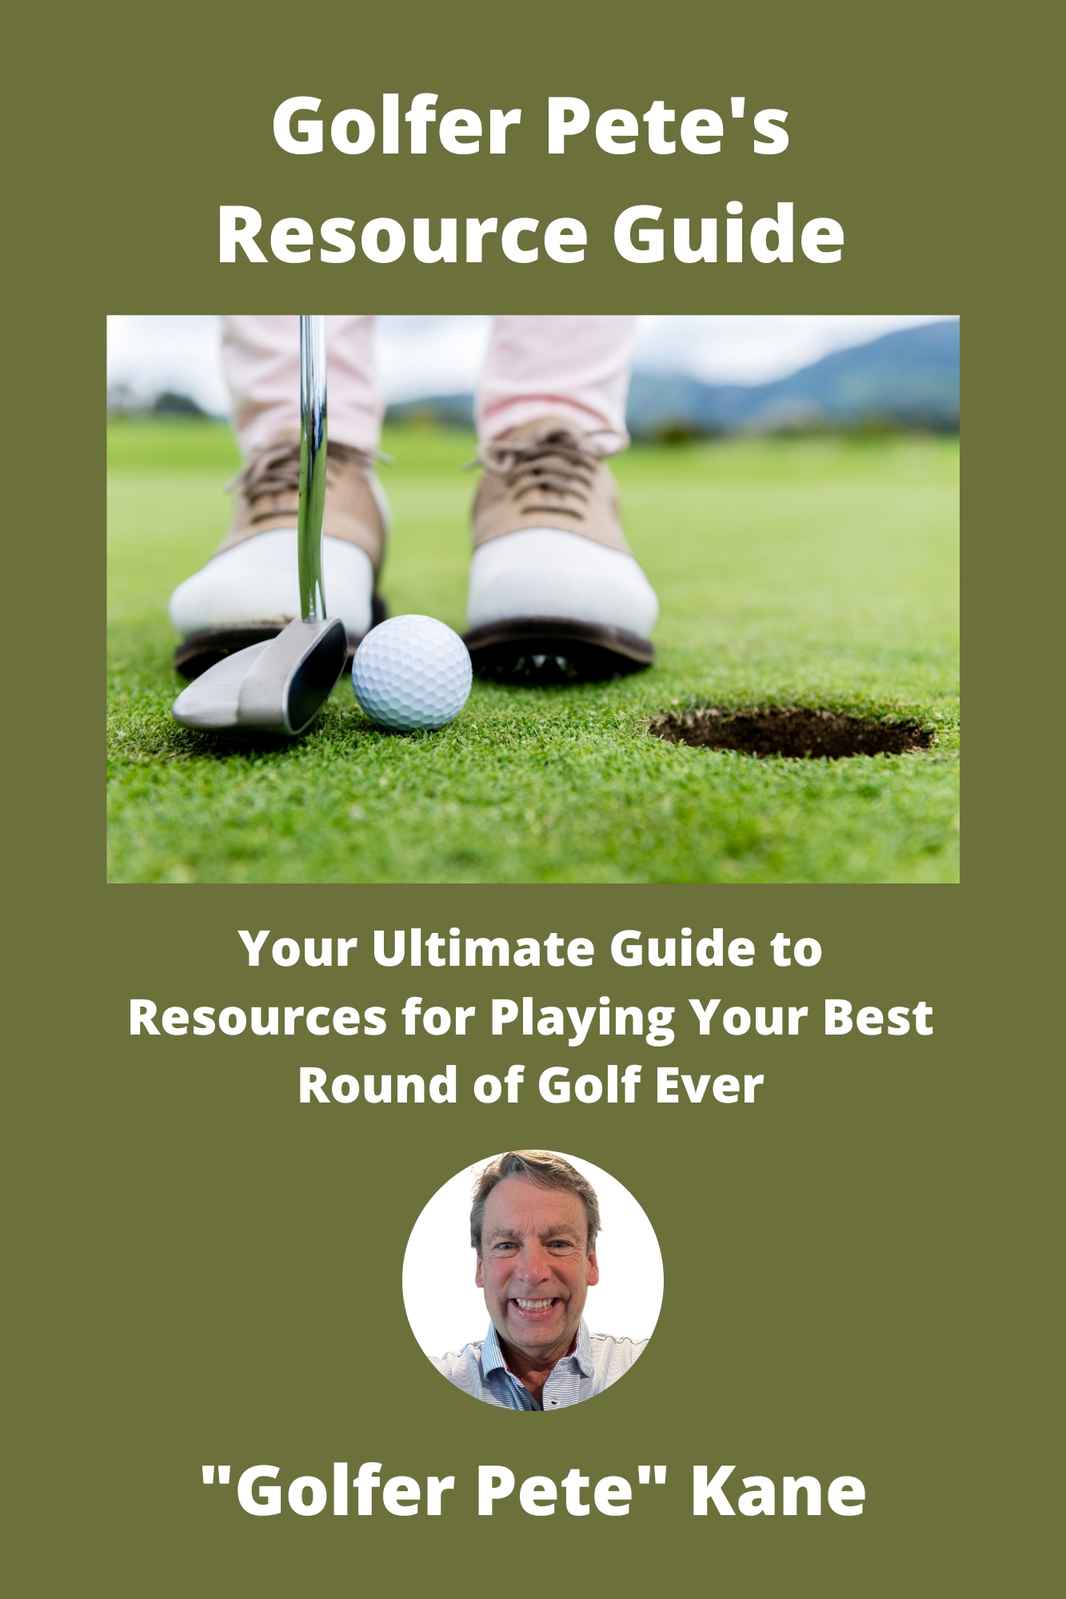 Golfer Pete's Resource Guide